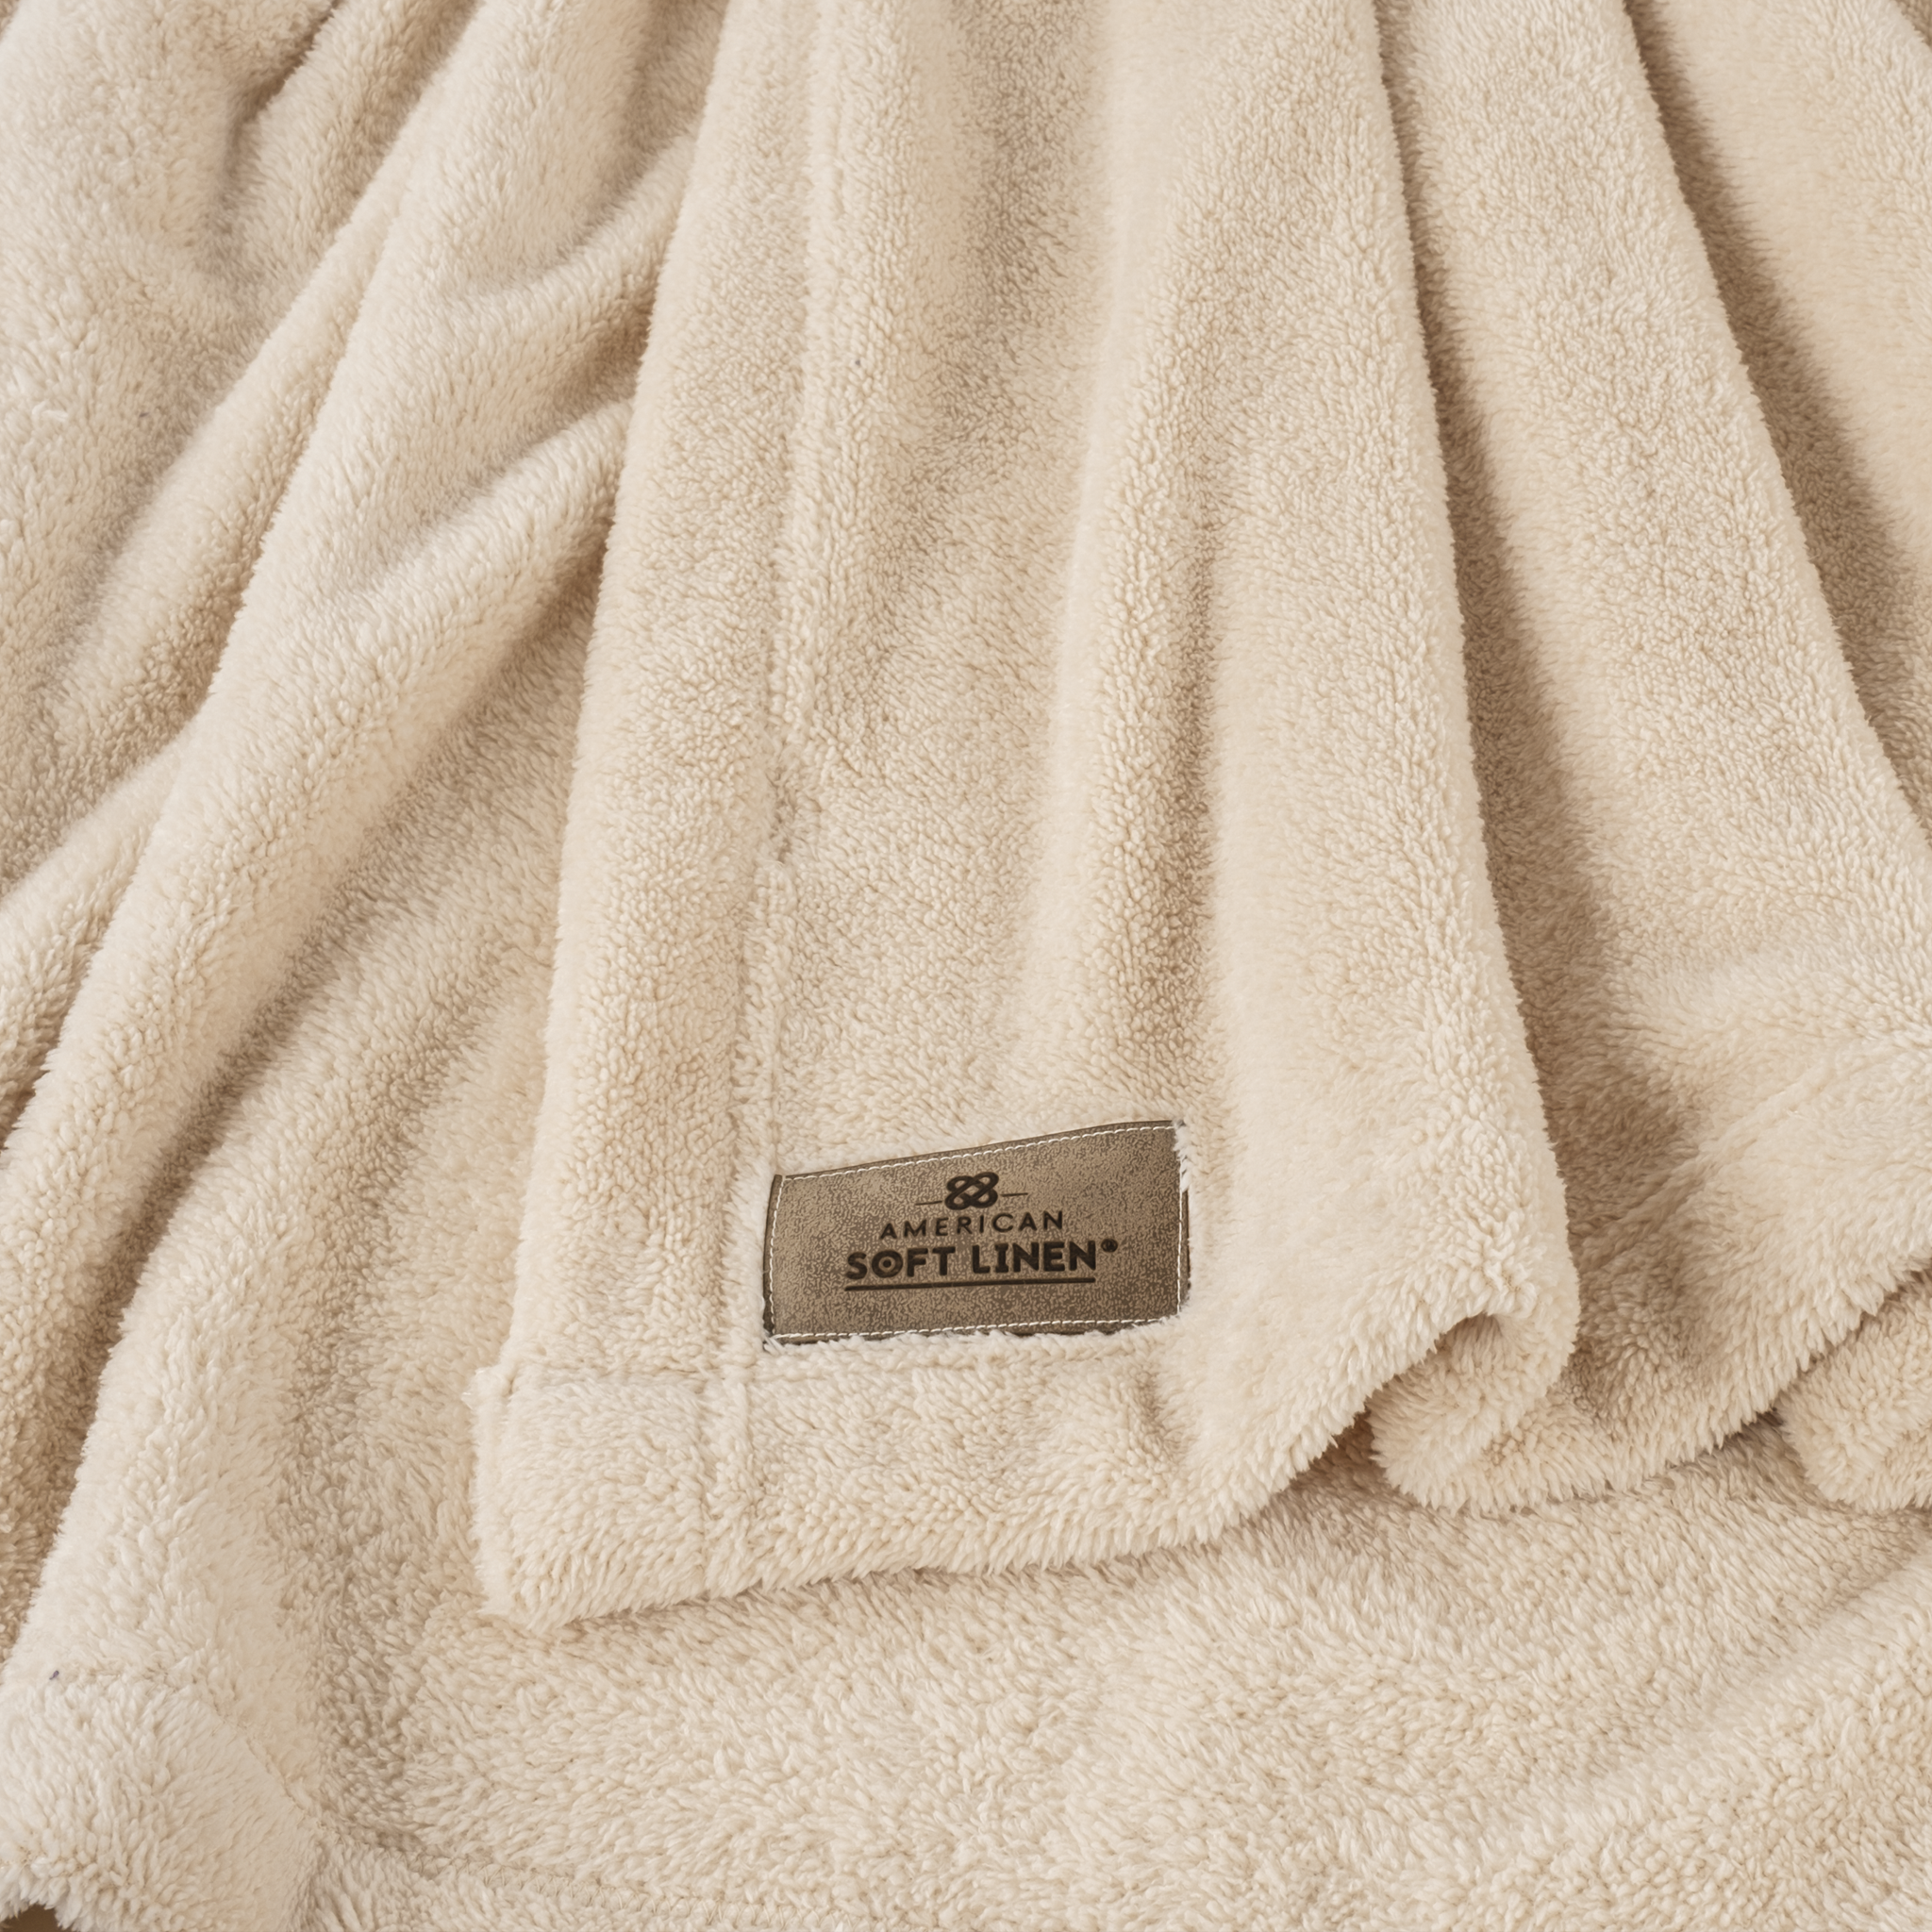 American Soft Linen - Bedding Fleece Blanket - Wholesale - 24 Set Case Pack - Throw Size 50x60 inches - Sand-Taupe - 4